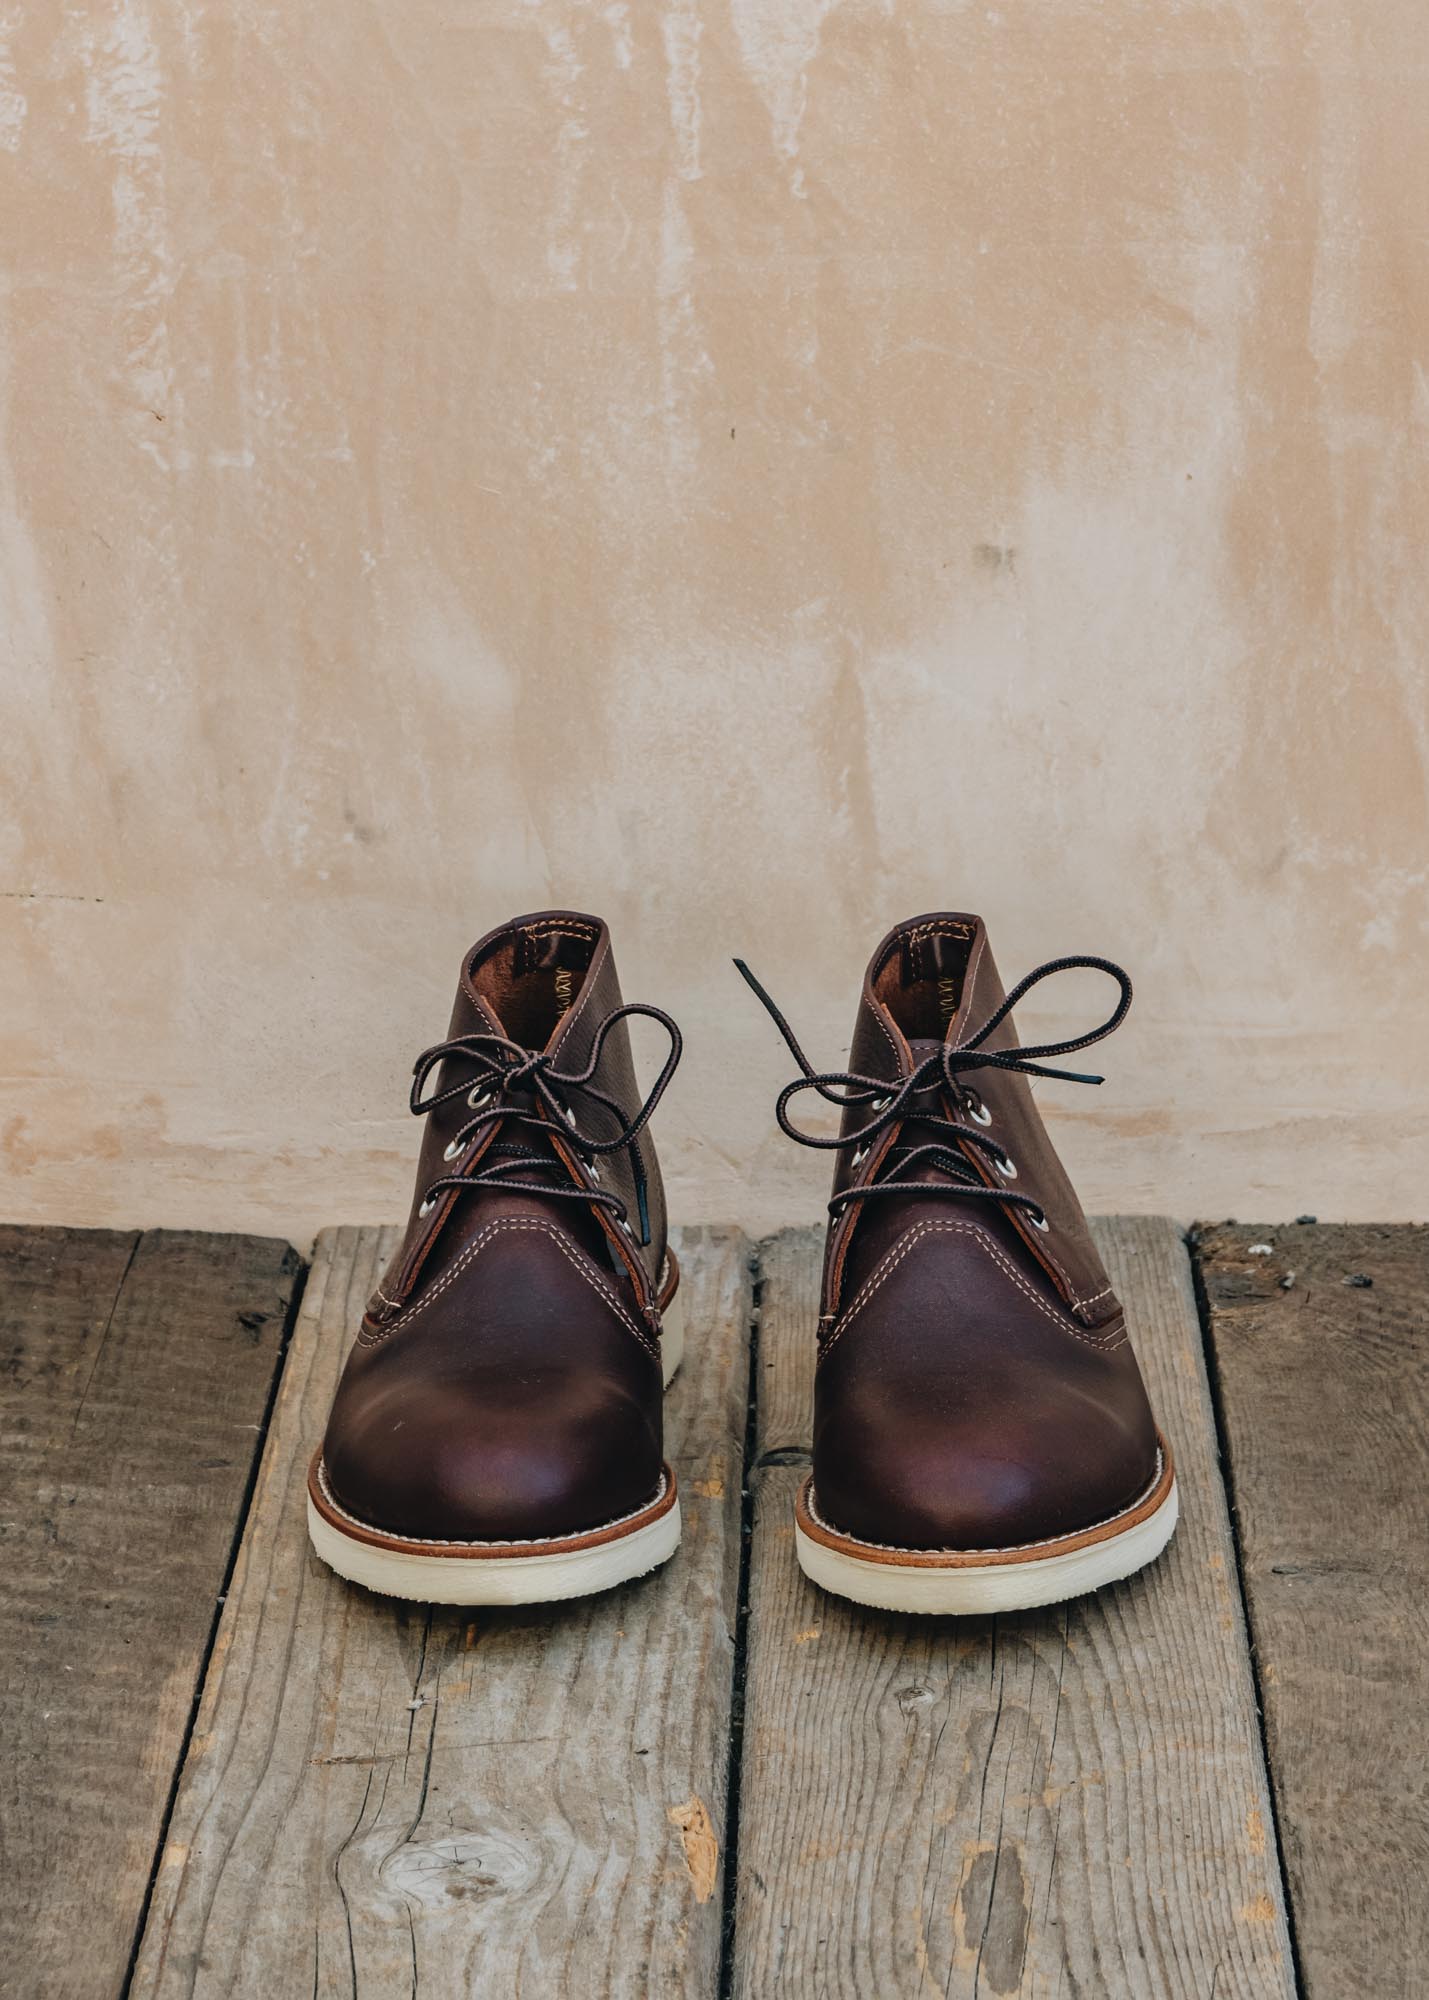 Red Wing Chukka Boots in Briar Oil Slick